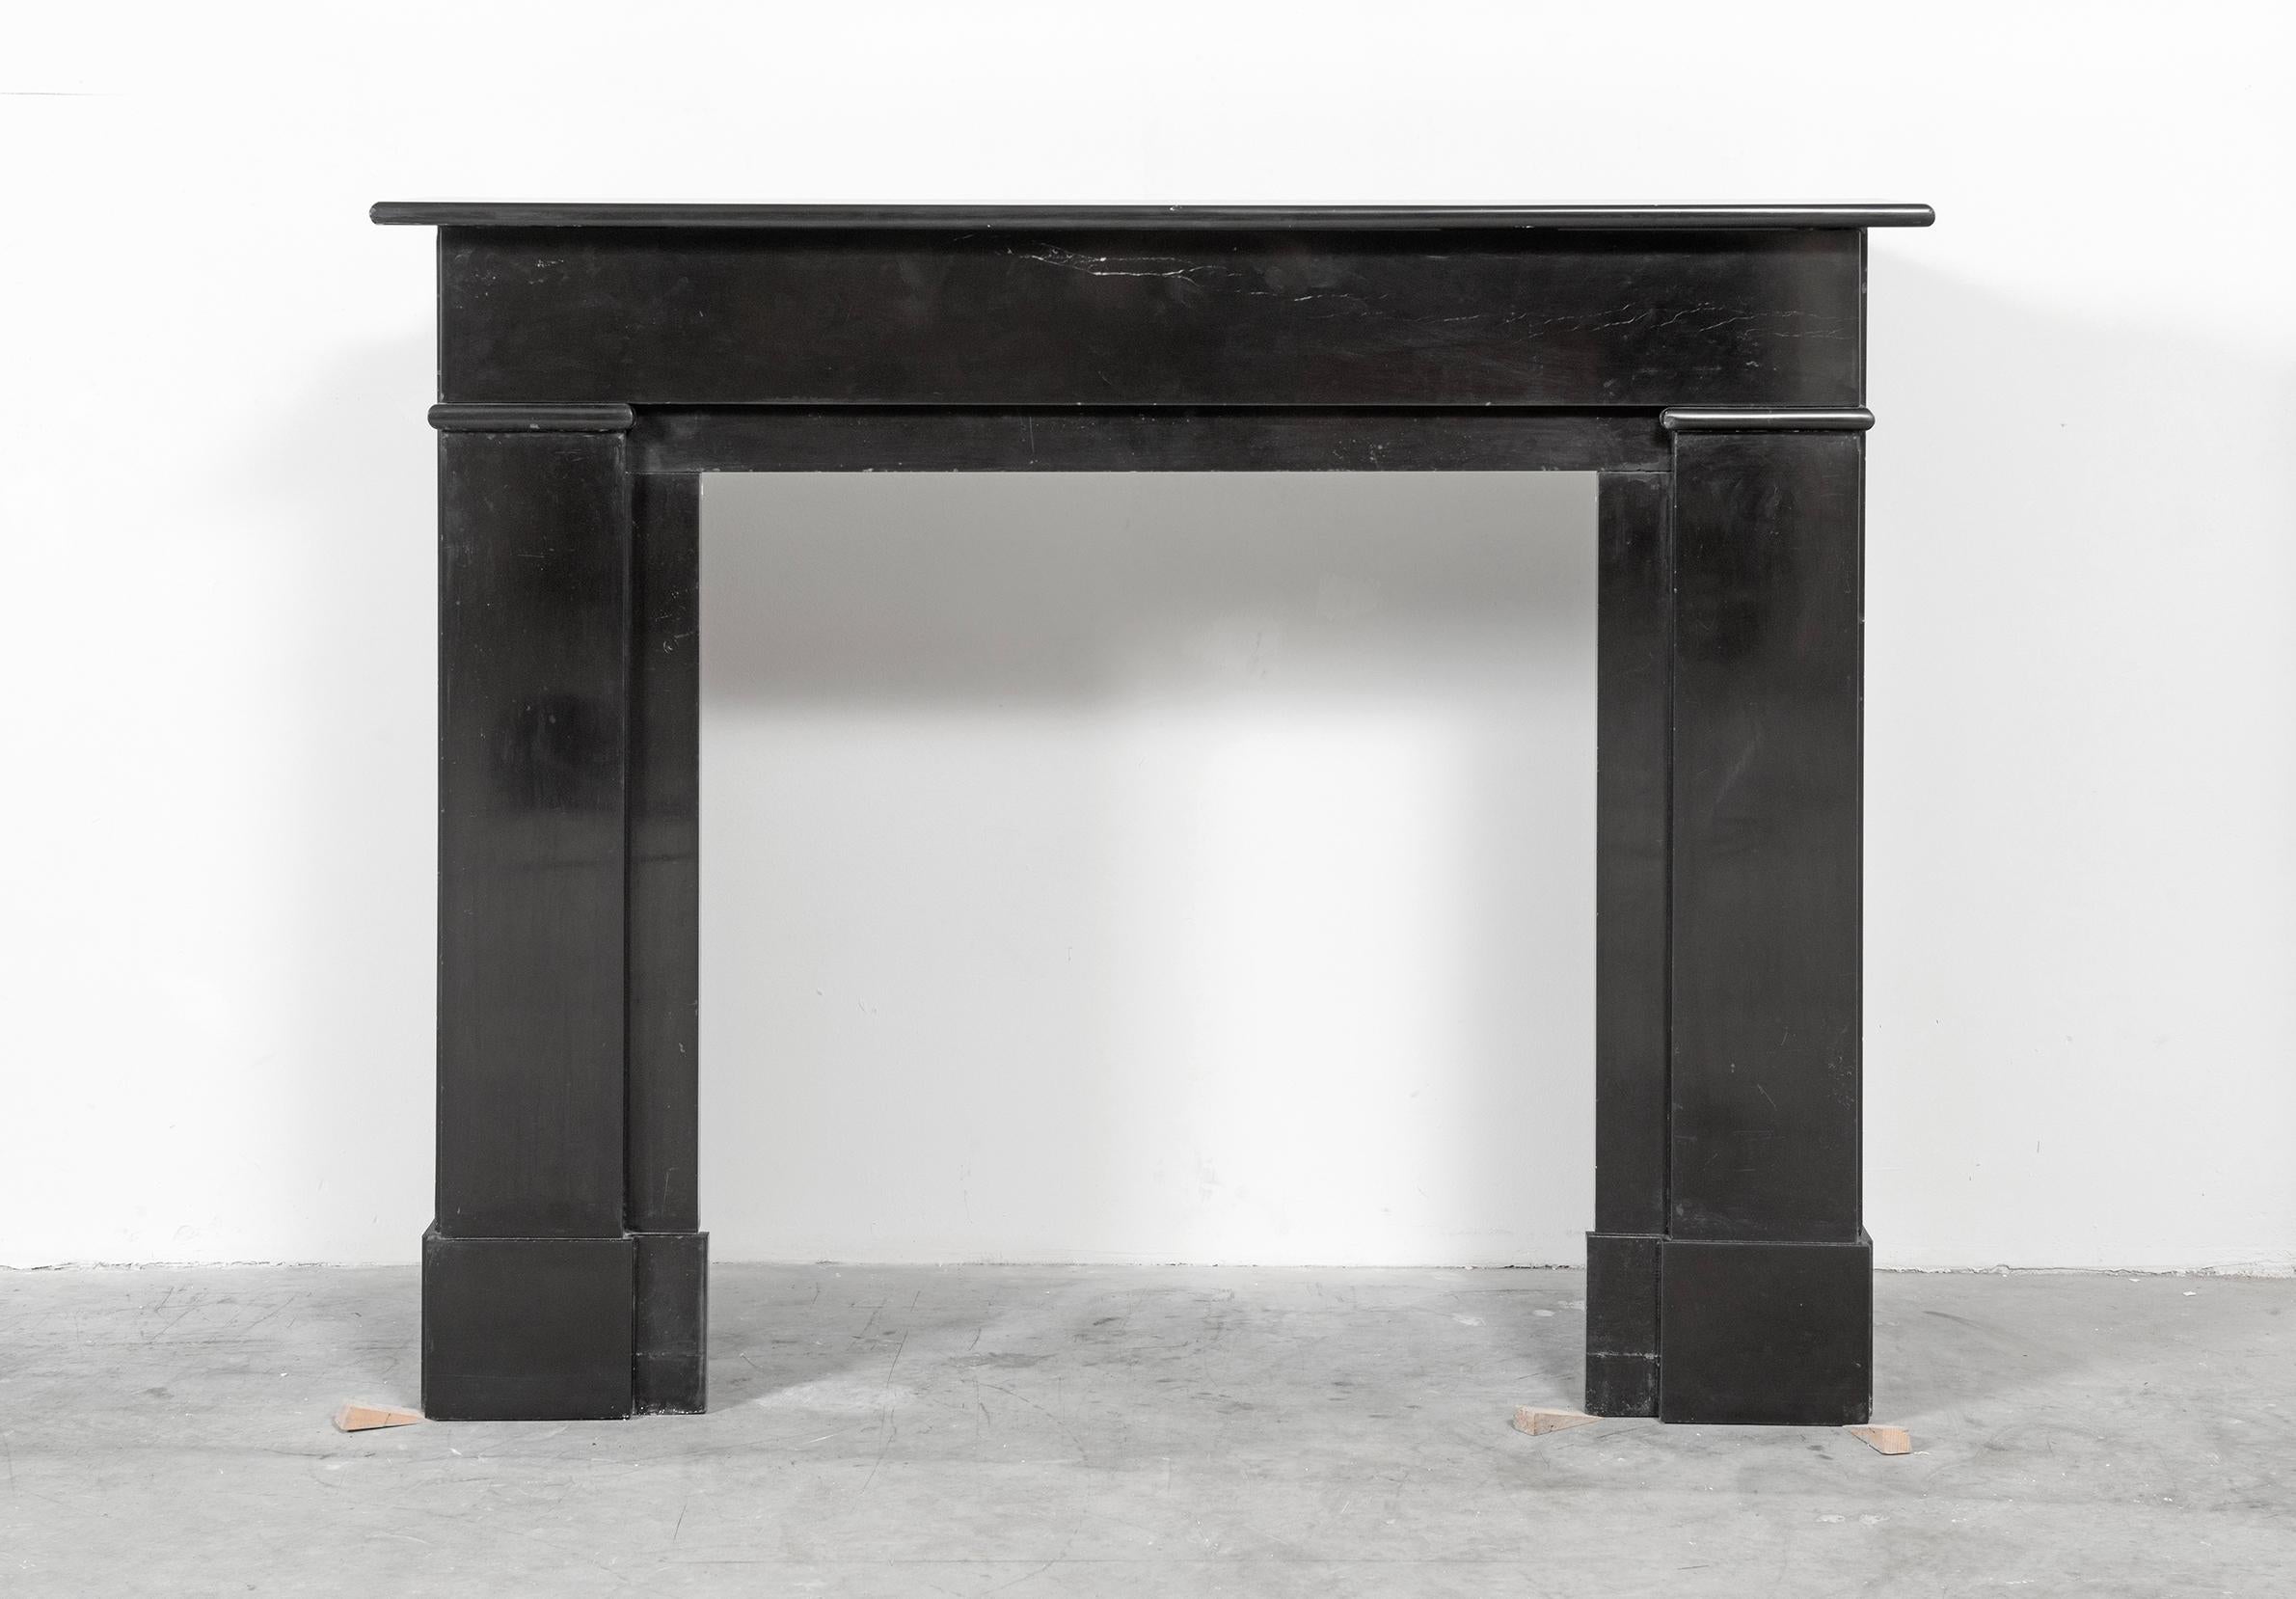 A nice Dutch paneled fireplace in Belgian black marble.
This deep black marble come from the quarry of Mazy.
Made between 1920 and 1970 these mantels where used all over Holland, usually in multi story houses with on each floor two similar